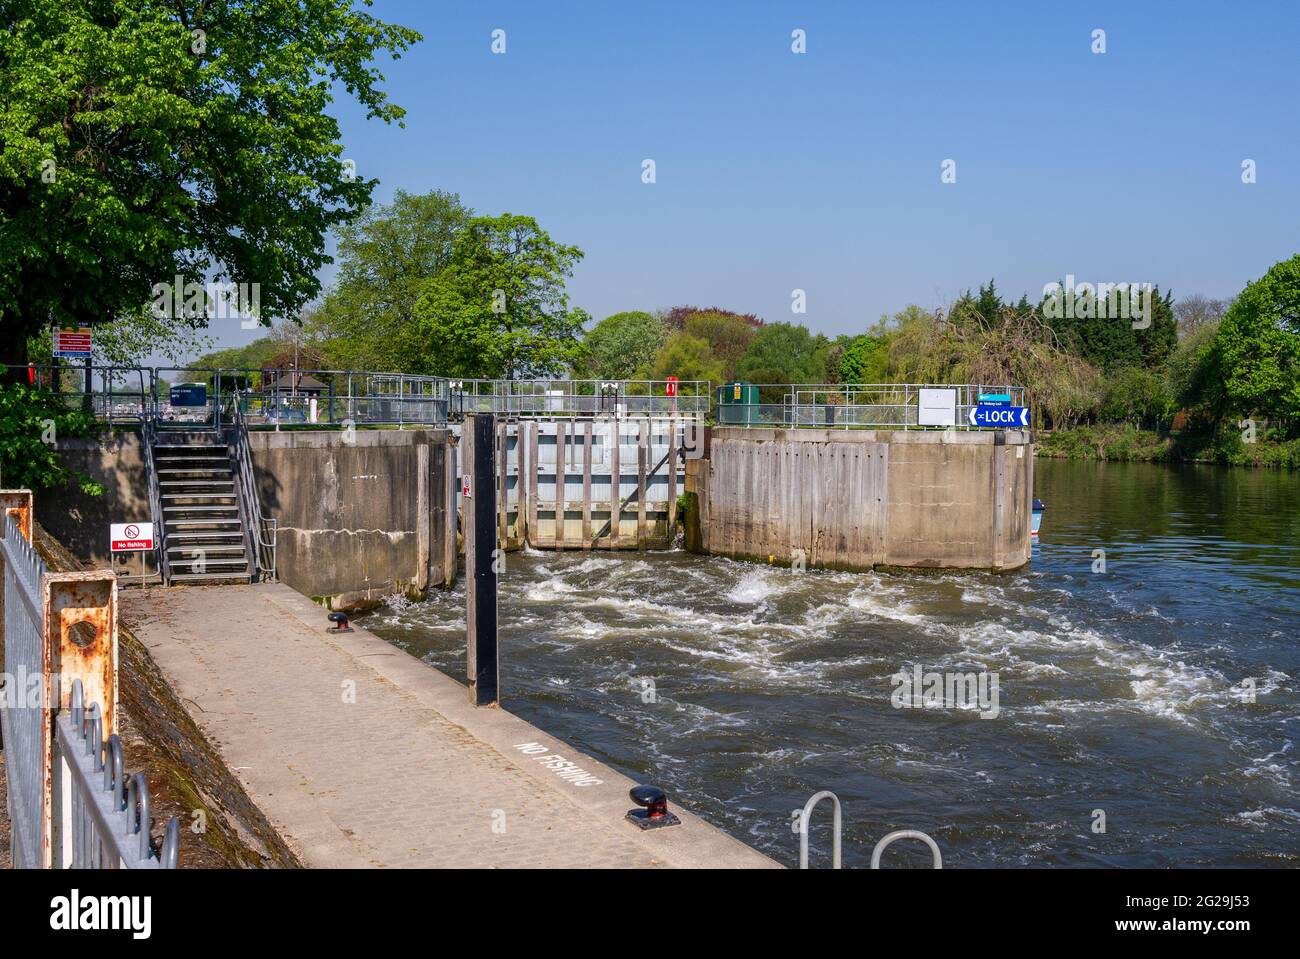 A view of the lock on the River Thames at Molesey, Surrey Stock Photo